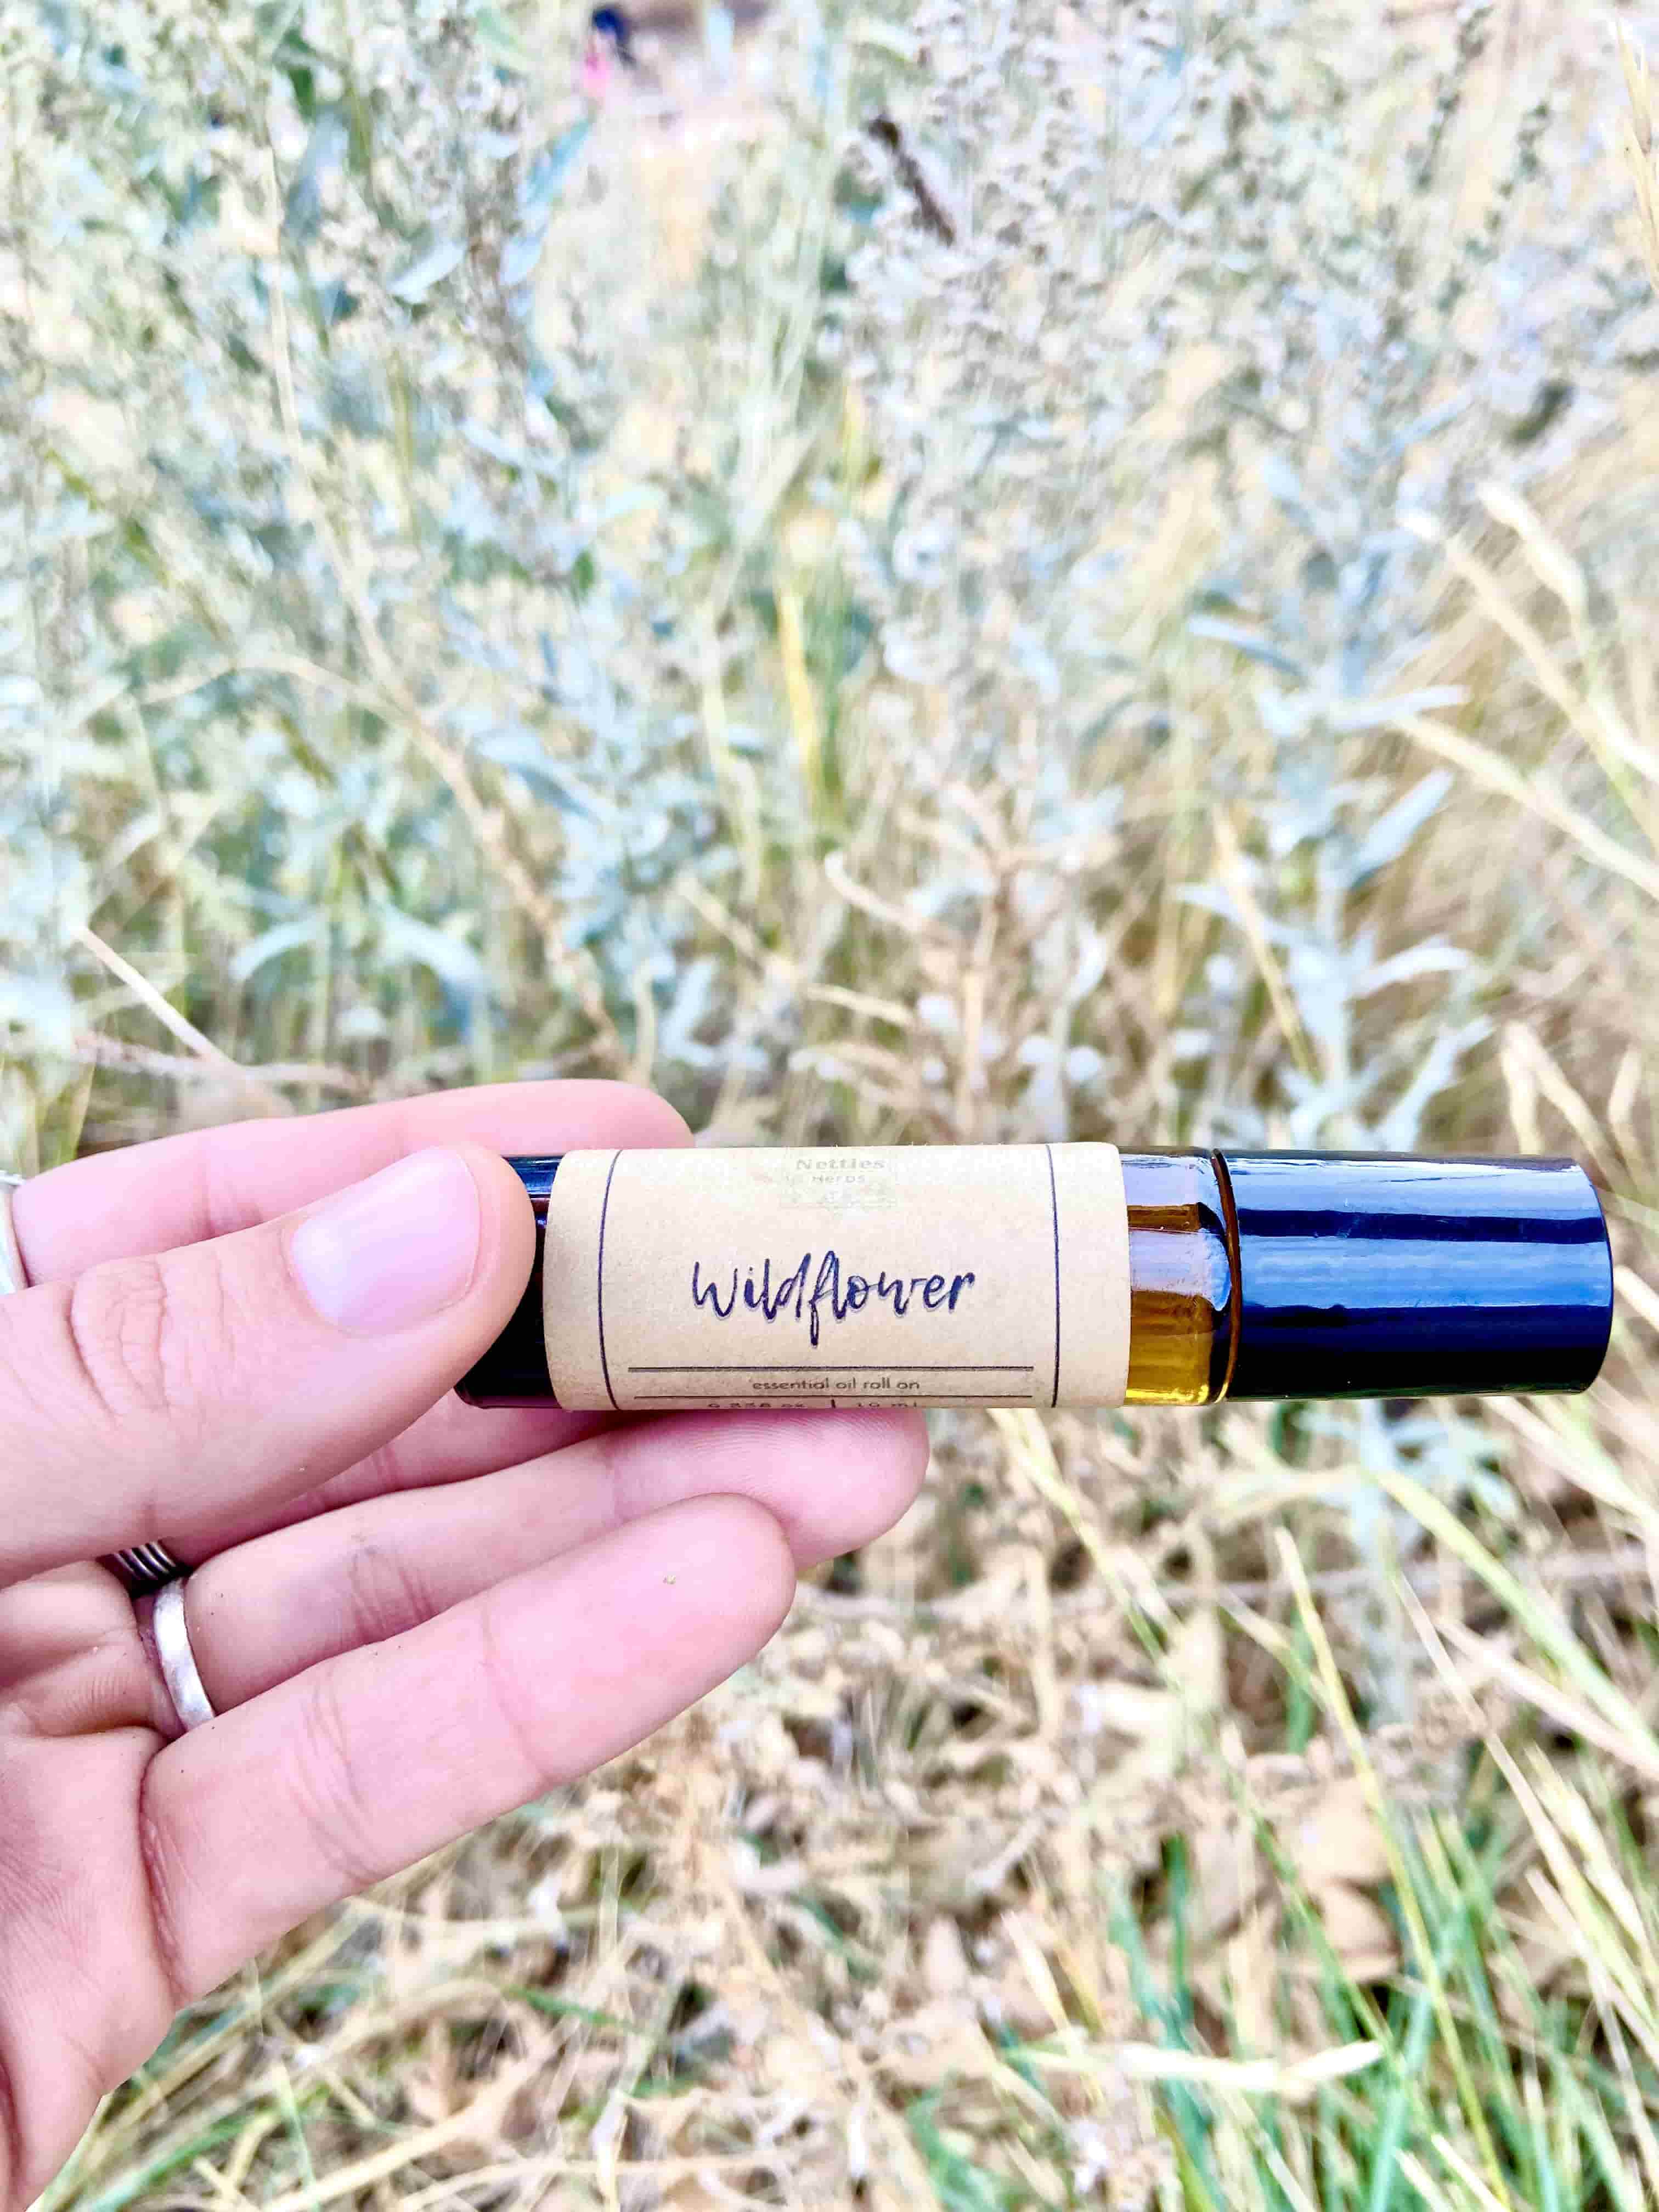 Wildflower Essential Oil Roll On. Blended with grounding Frankincense, calming Lavender, uplifting Bergamot, & mental stimulating Rosemary, this 100% pure, therapeutic grade roll on stimulates your senses & promotes peace & happiness.